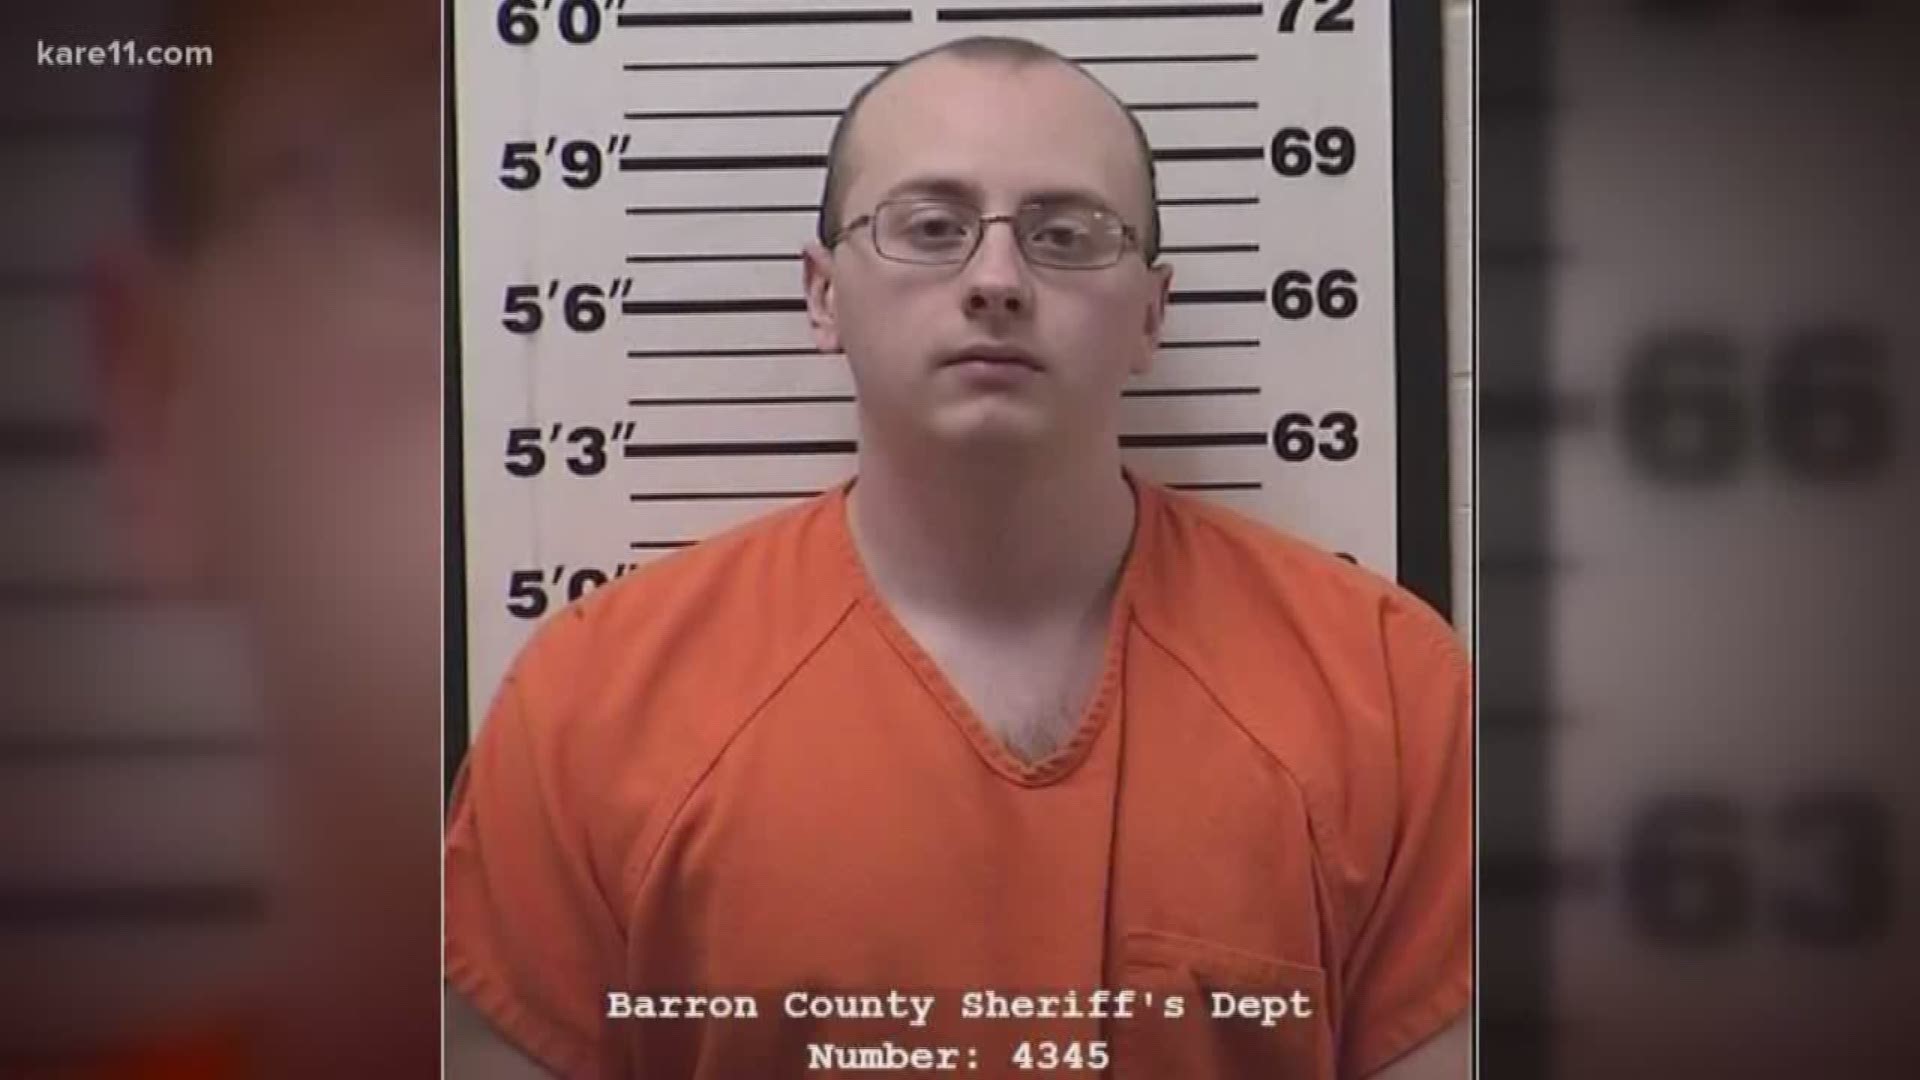 The man accused of kidnapping Jayme Closs is being held on five million dollars bond.
We got our first look at Jake Patterson just a few hours ago -- as he made his first court appearance via video feed." Subscribe to KARE 11: https://www.youtube.com/subscription_center?add_user=kare11
" Watch more KARE 11 video: https://www.youtube.com/user/KARE11/videos

Welcome to the official YouTube channel of KARE 11 News. Subscribe to our channel for compelling and dramatic storytelling, award winning investigations, breaking news and information you can use.

Connect with KARE 11 Online! 
Visit KARE11.com: http://www.kare11.com/
Find KARE 11 on Facebook: https://www.facebook.com/KARE11/
Follow KARE 11 on Twitter: https://twitter.com/kare11
Follow KARE 11 on Instagram: https://www.instagram.com/kare11/